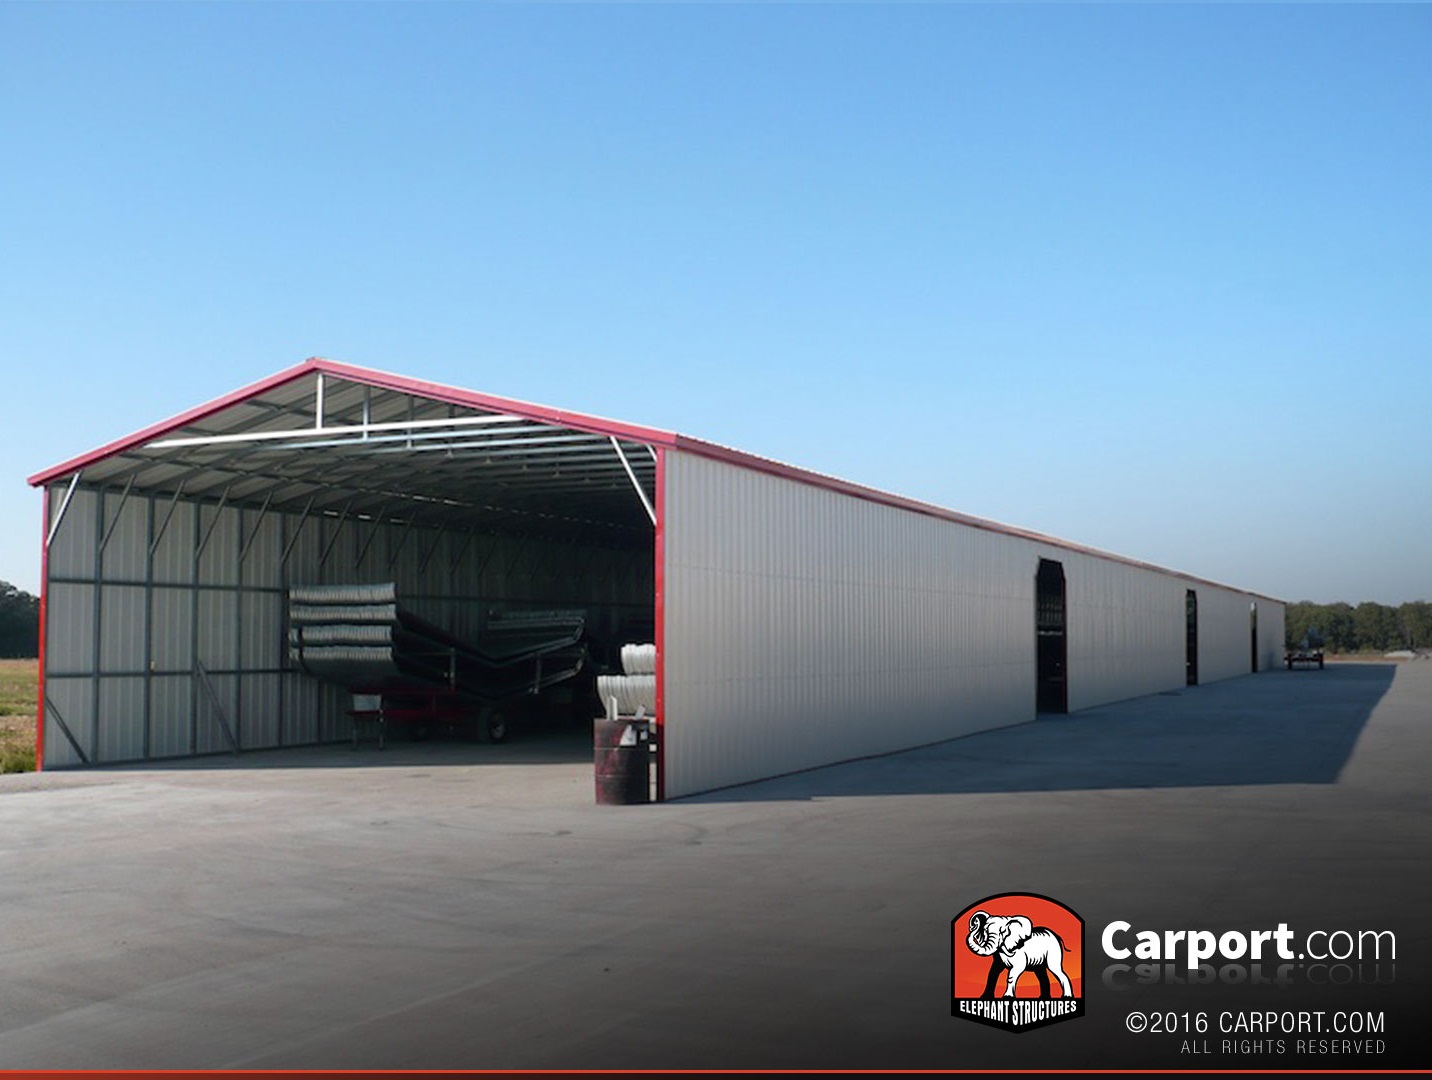 30' x 200' Warehouse Storage Building with Open Ends | Warehouse Info